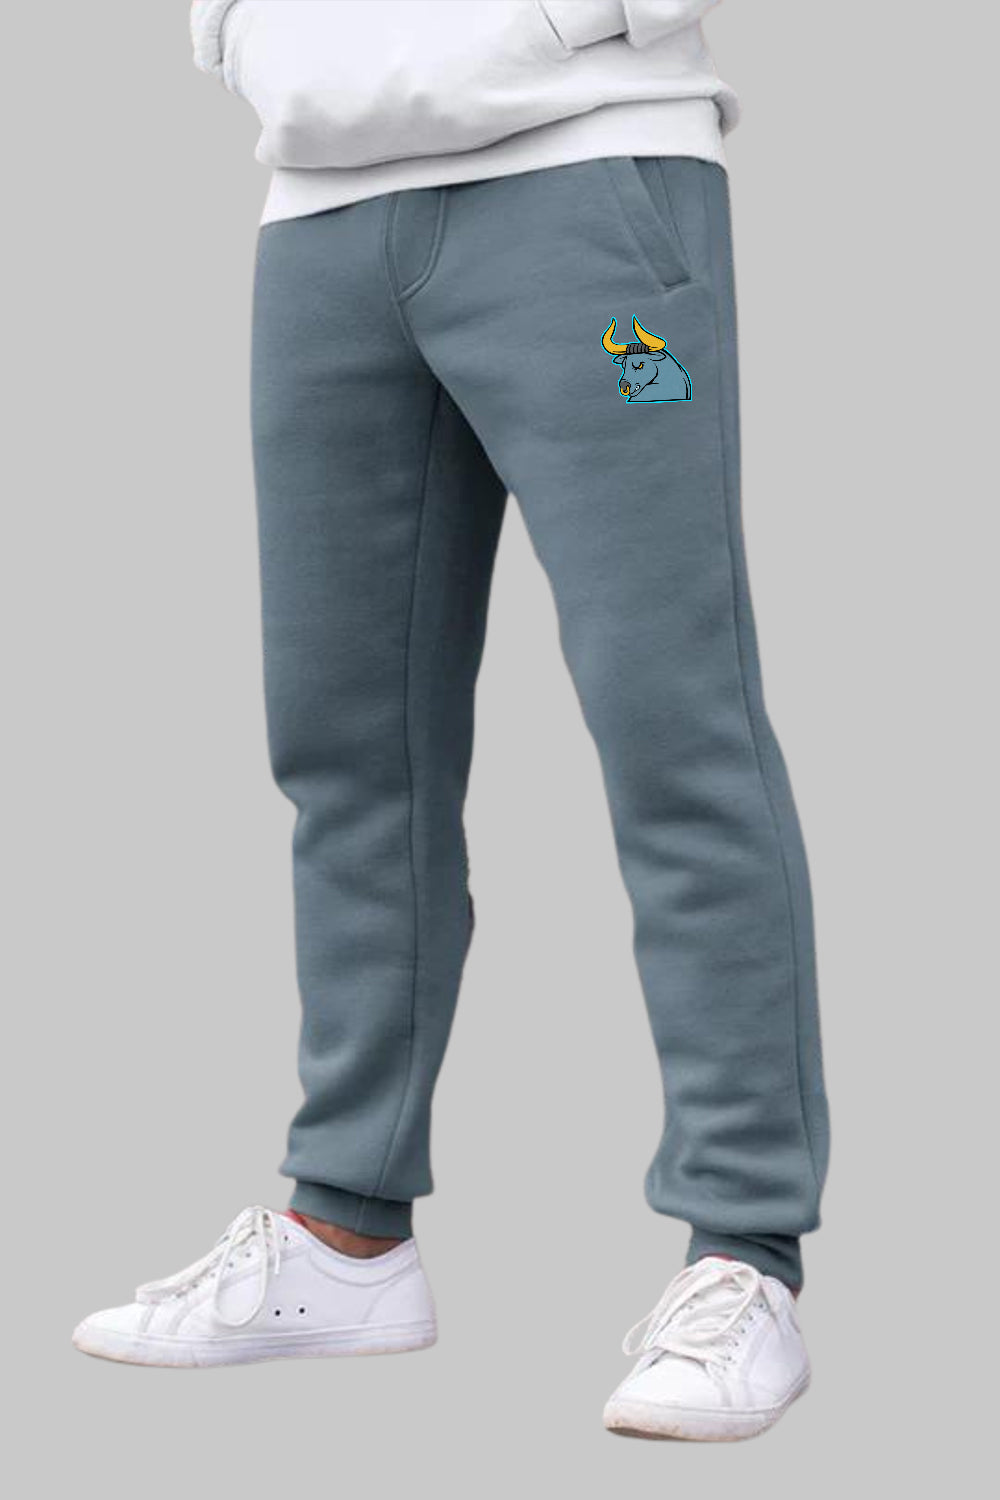 Bull Graphic Printed Blue Grey Joggers